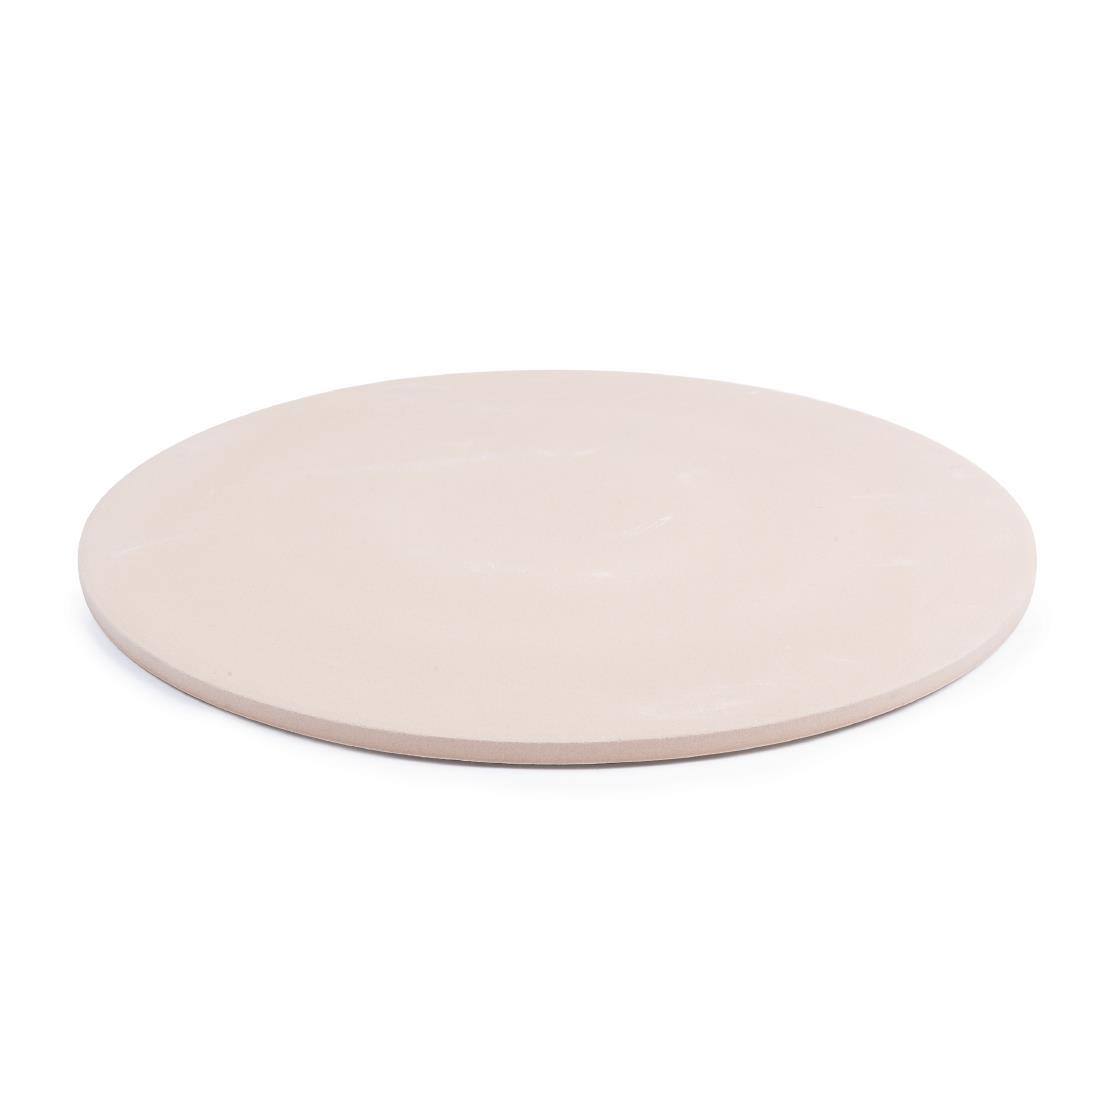 Round Pizza Stone with Metal Serving Rack 15in - CL714  - 4